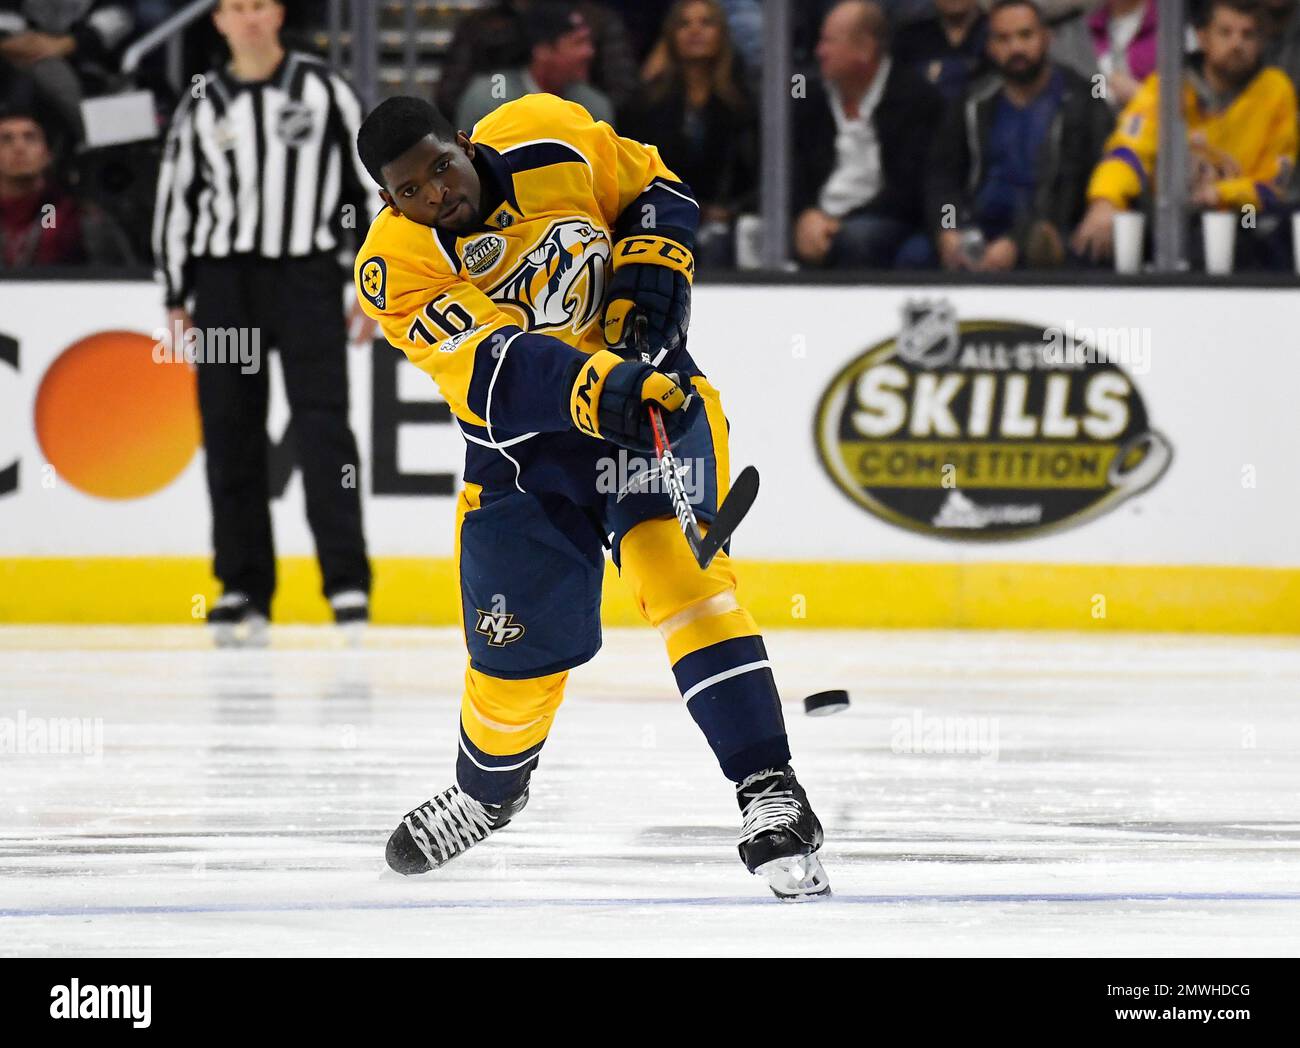 Nashville Predators P.K. Subban shoots the puck during the Four Line Challenge portion of the NHL All-Star Skills Competition, Saturday, Jan. 28, 2017, in Los Angeles